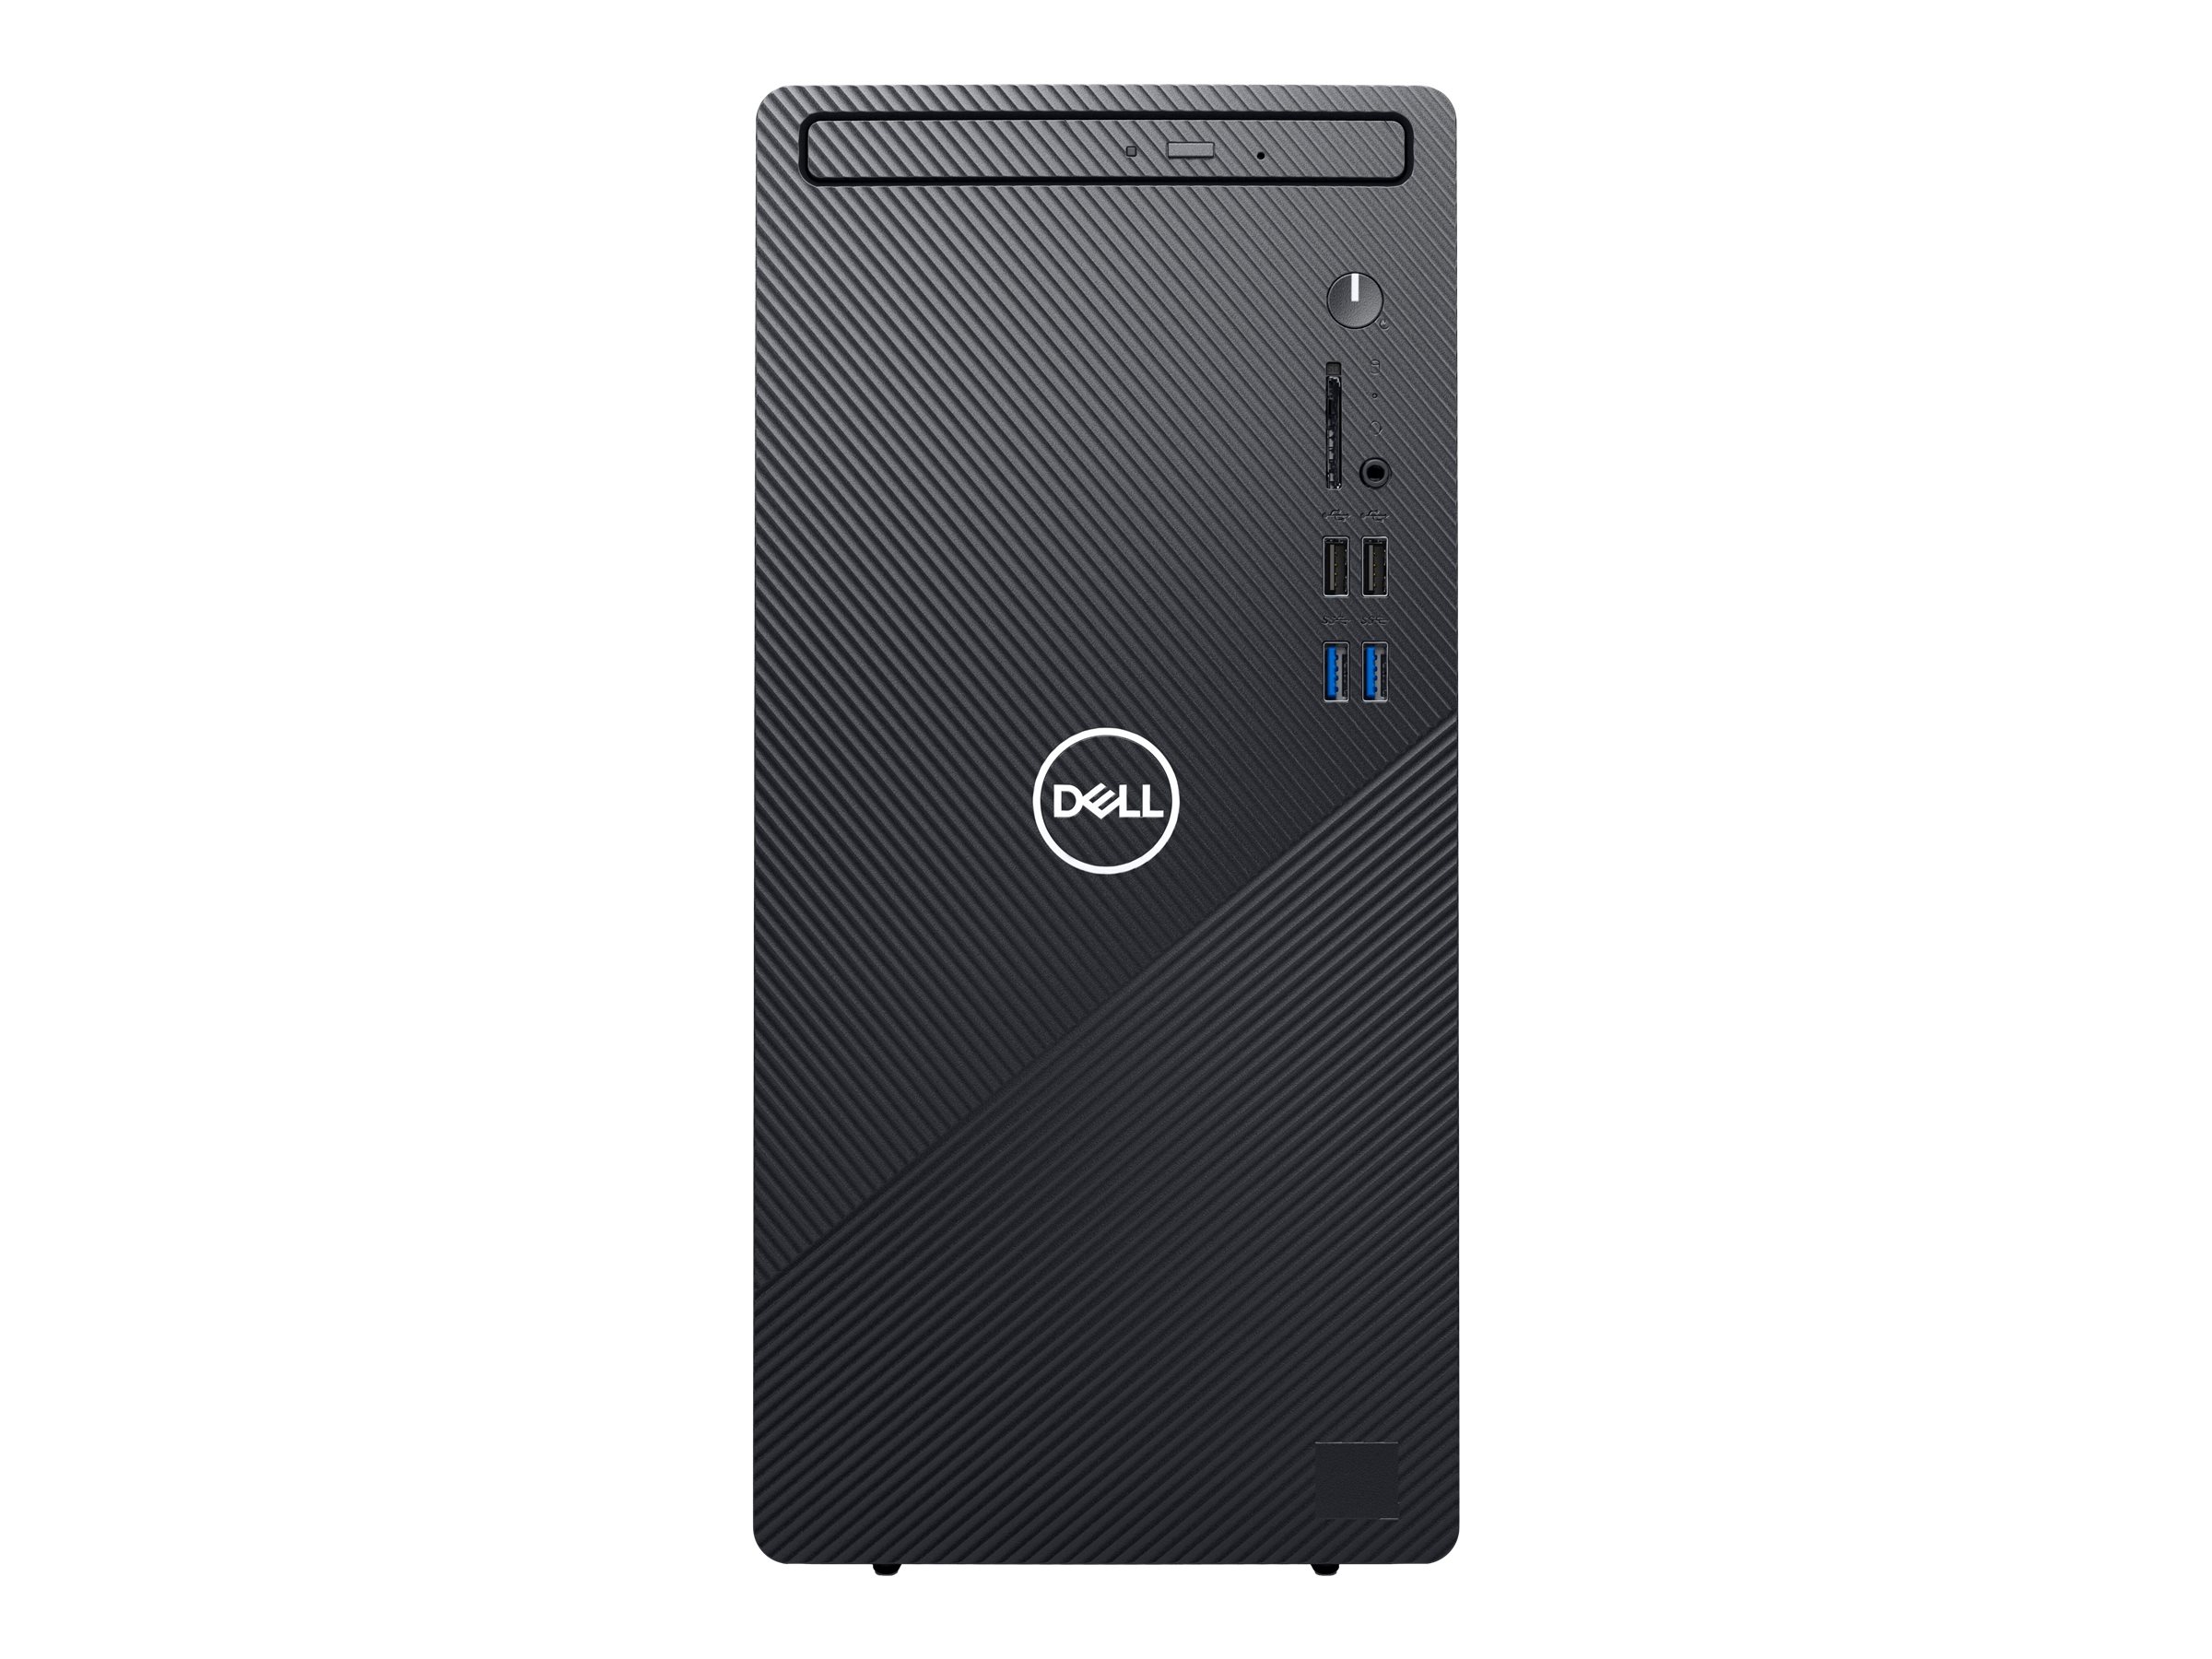 Dell Inspiron 3880 - Compact desktop - Core i7 10700 / 2.9 GHz - RAM 8 GB - SSD 512 GB - NVMe - DVD-Writer - UHD Graphics 630 - GigE - WLAN: Bluetooth, 802.11a/b/g/n/ac - Win 10 Home 64-bit - monitor: none - black - image 3 of 6